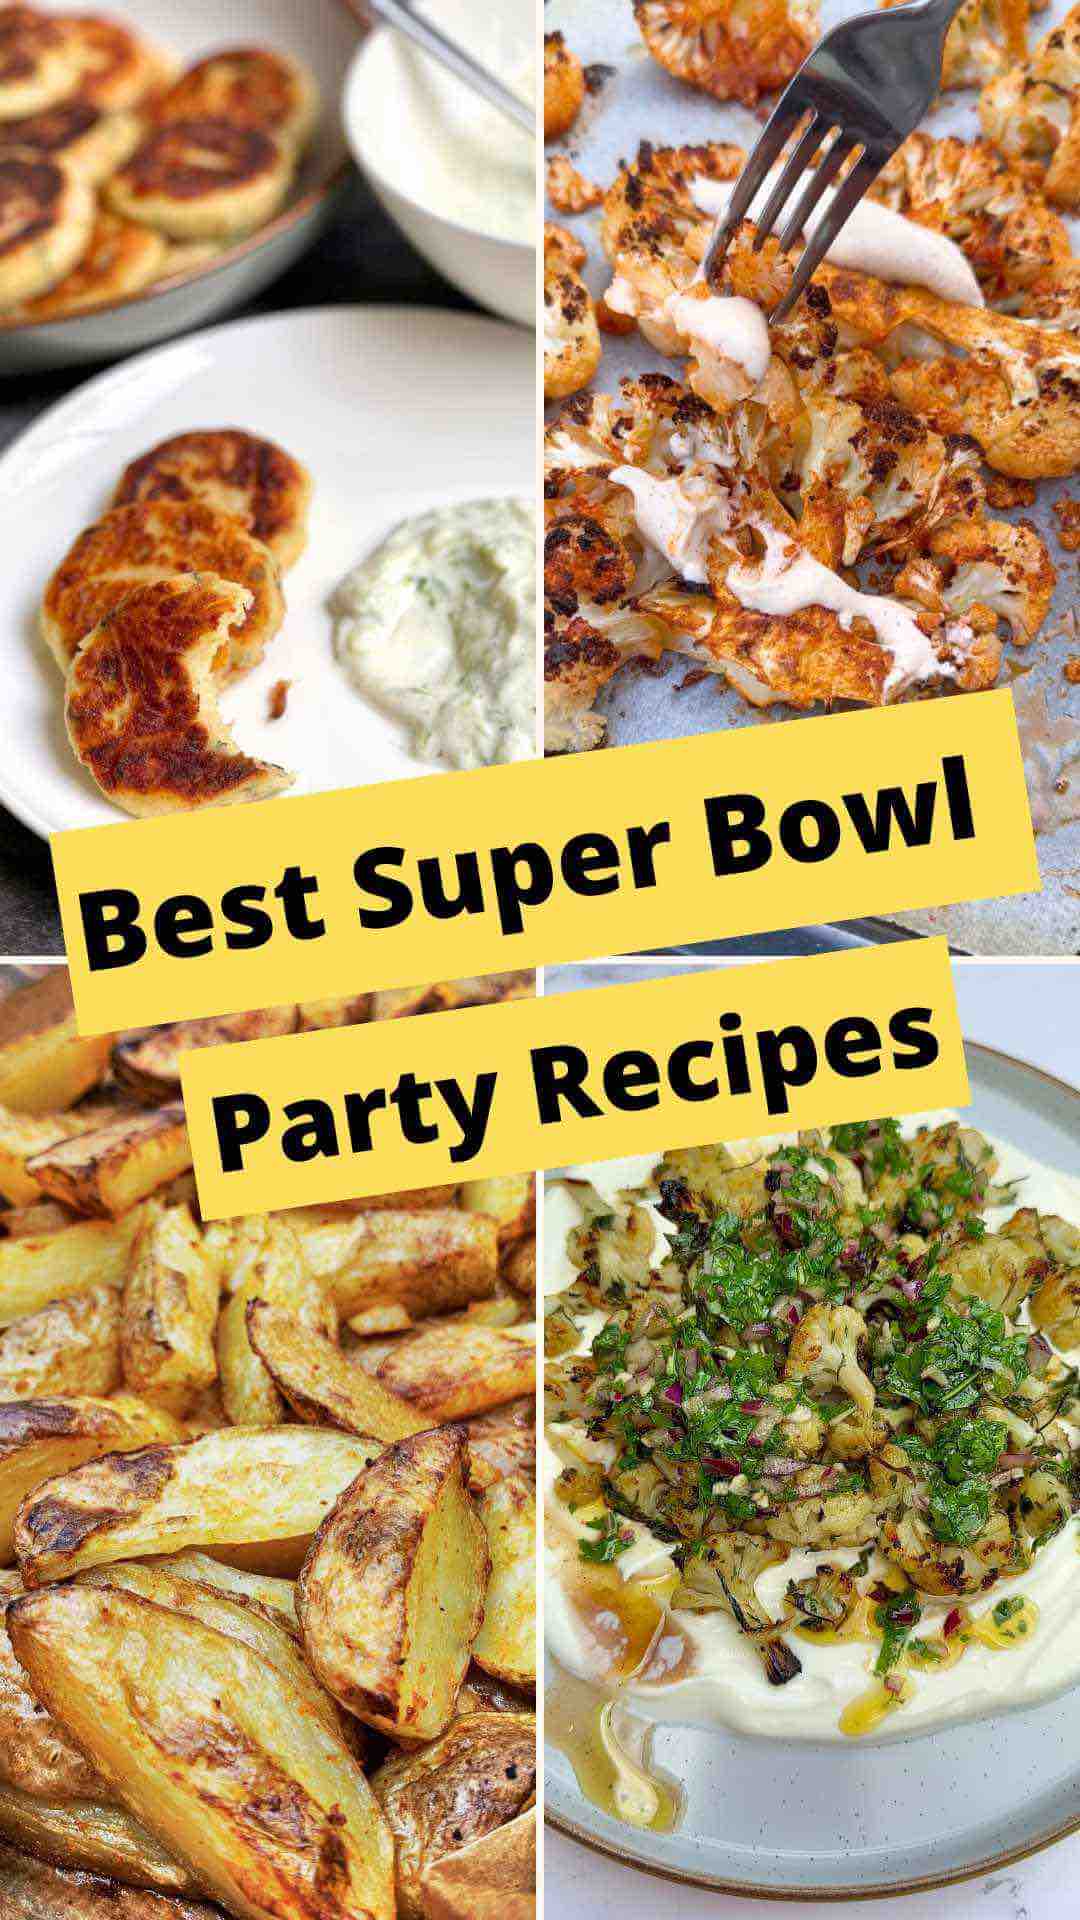 Easy Super Bowl Party Food Ideas collage with 4 different food ideas